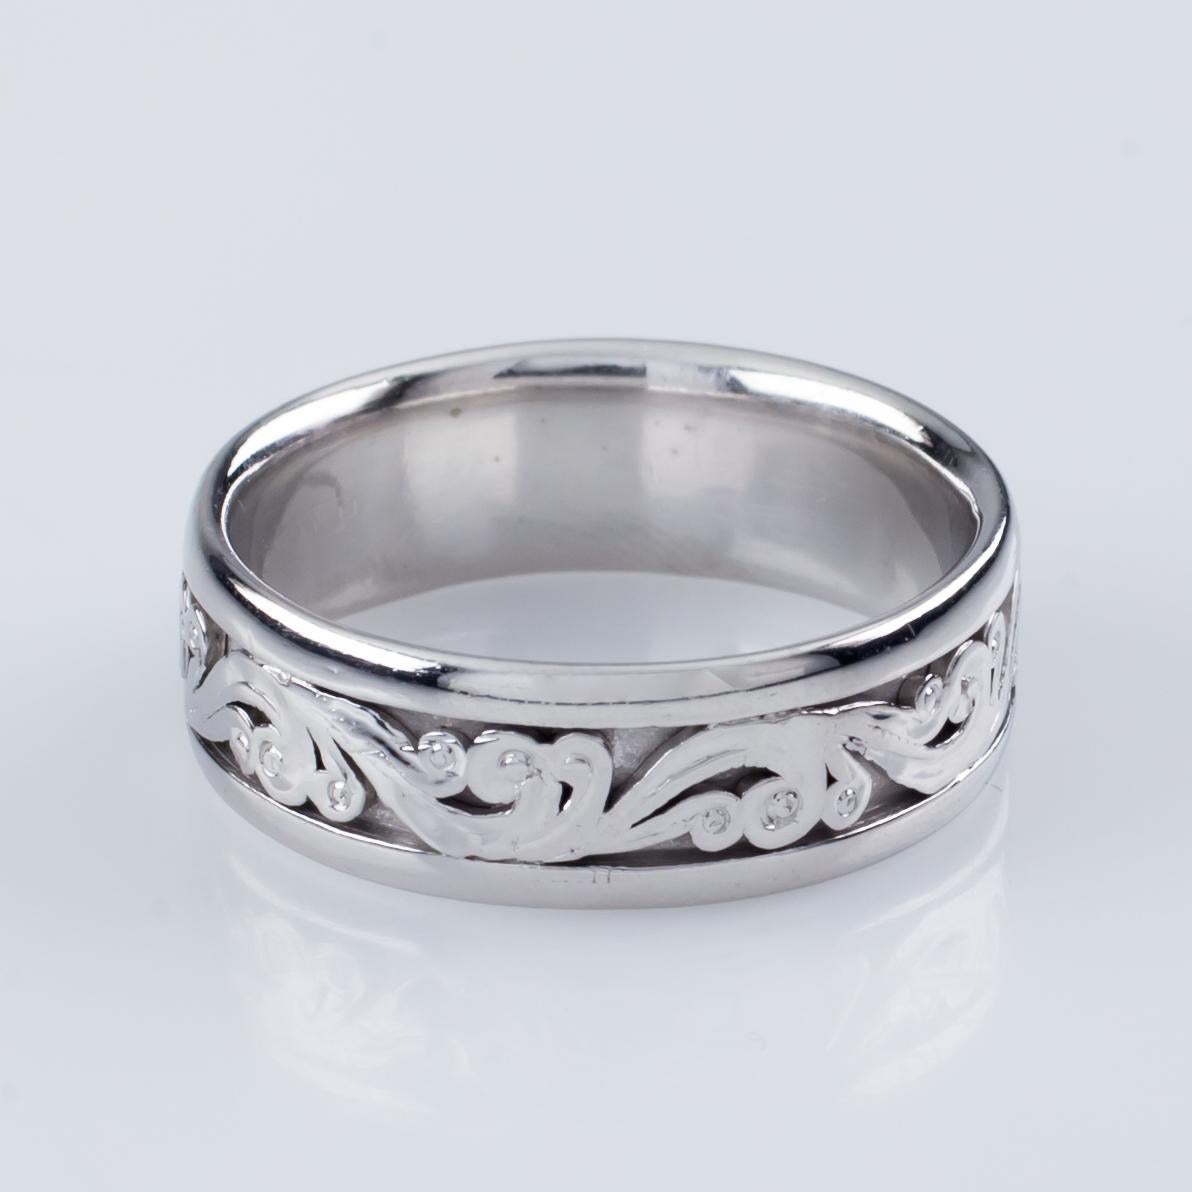 Gorgeous White Gold Wedding Band by Tacori
Features Floral Scroll Designs and Delicate Milgrain
Approximately 6.5 mm Wide
Size 11
Total Mass = 12.5 grams
Model #HT2392